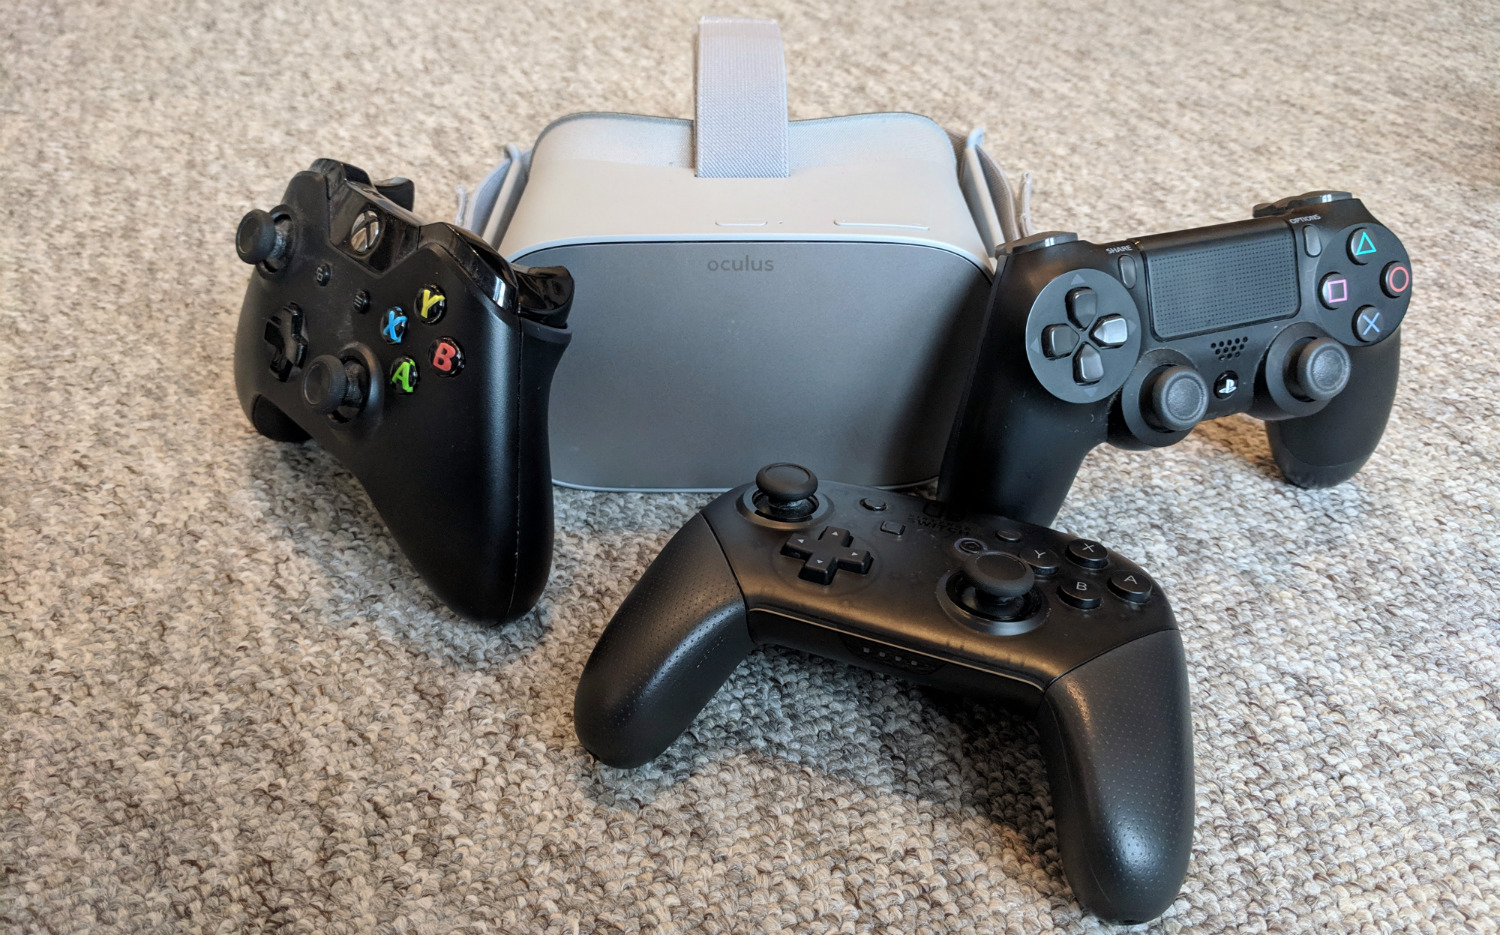 How To Use A PS4, Switch Xbox One Controller With Oculus Go